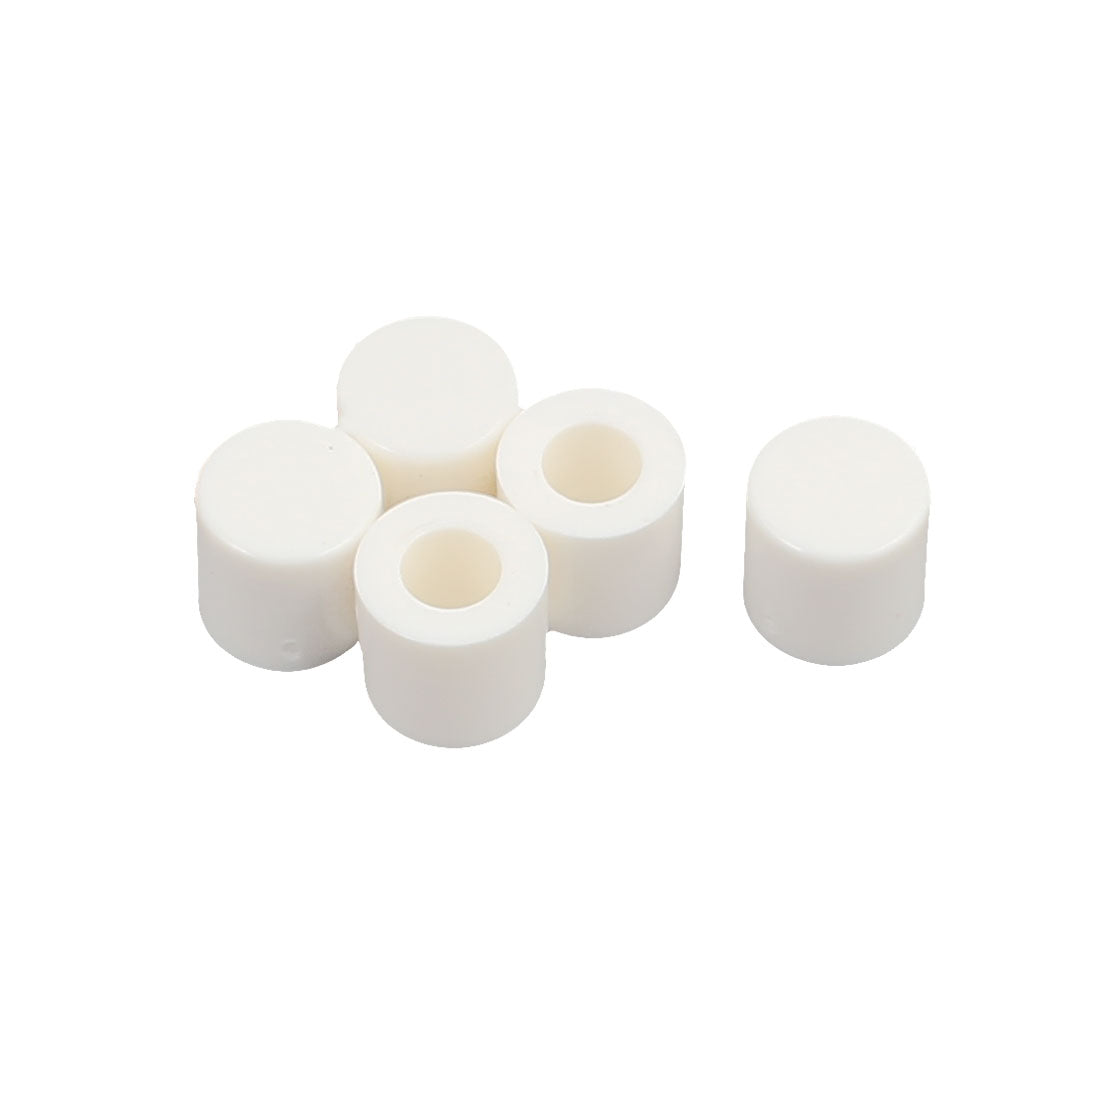 uxcell Uxcell 5Pcs Round Shaped Tactile Button Caps Covers Protector White for 6x6mm Tact Switch